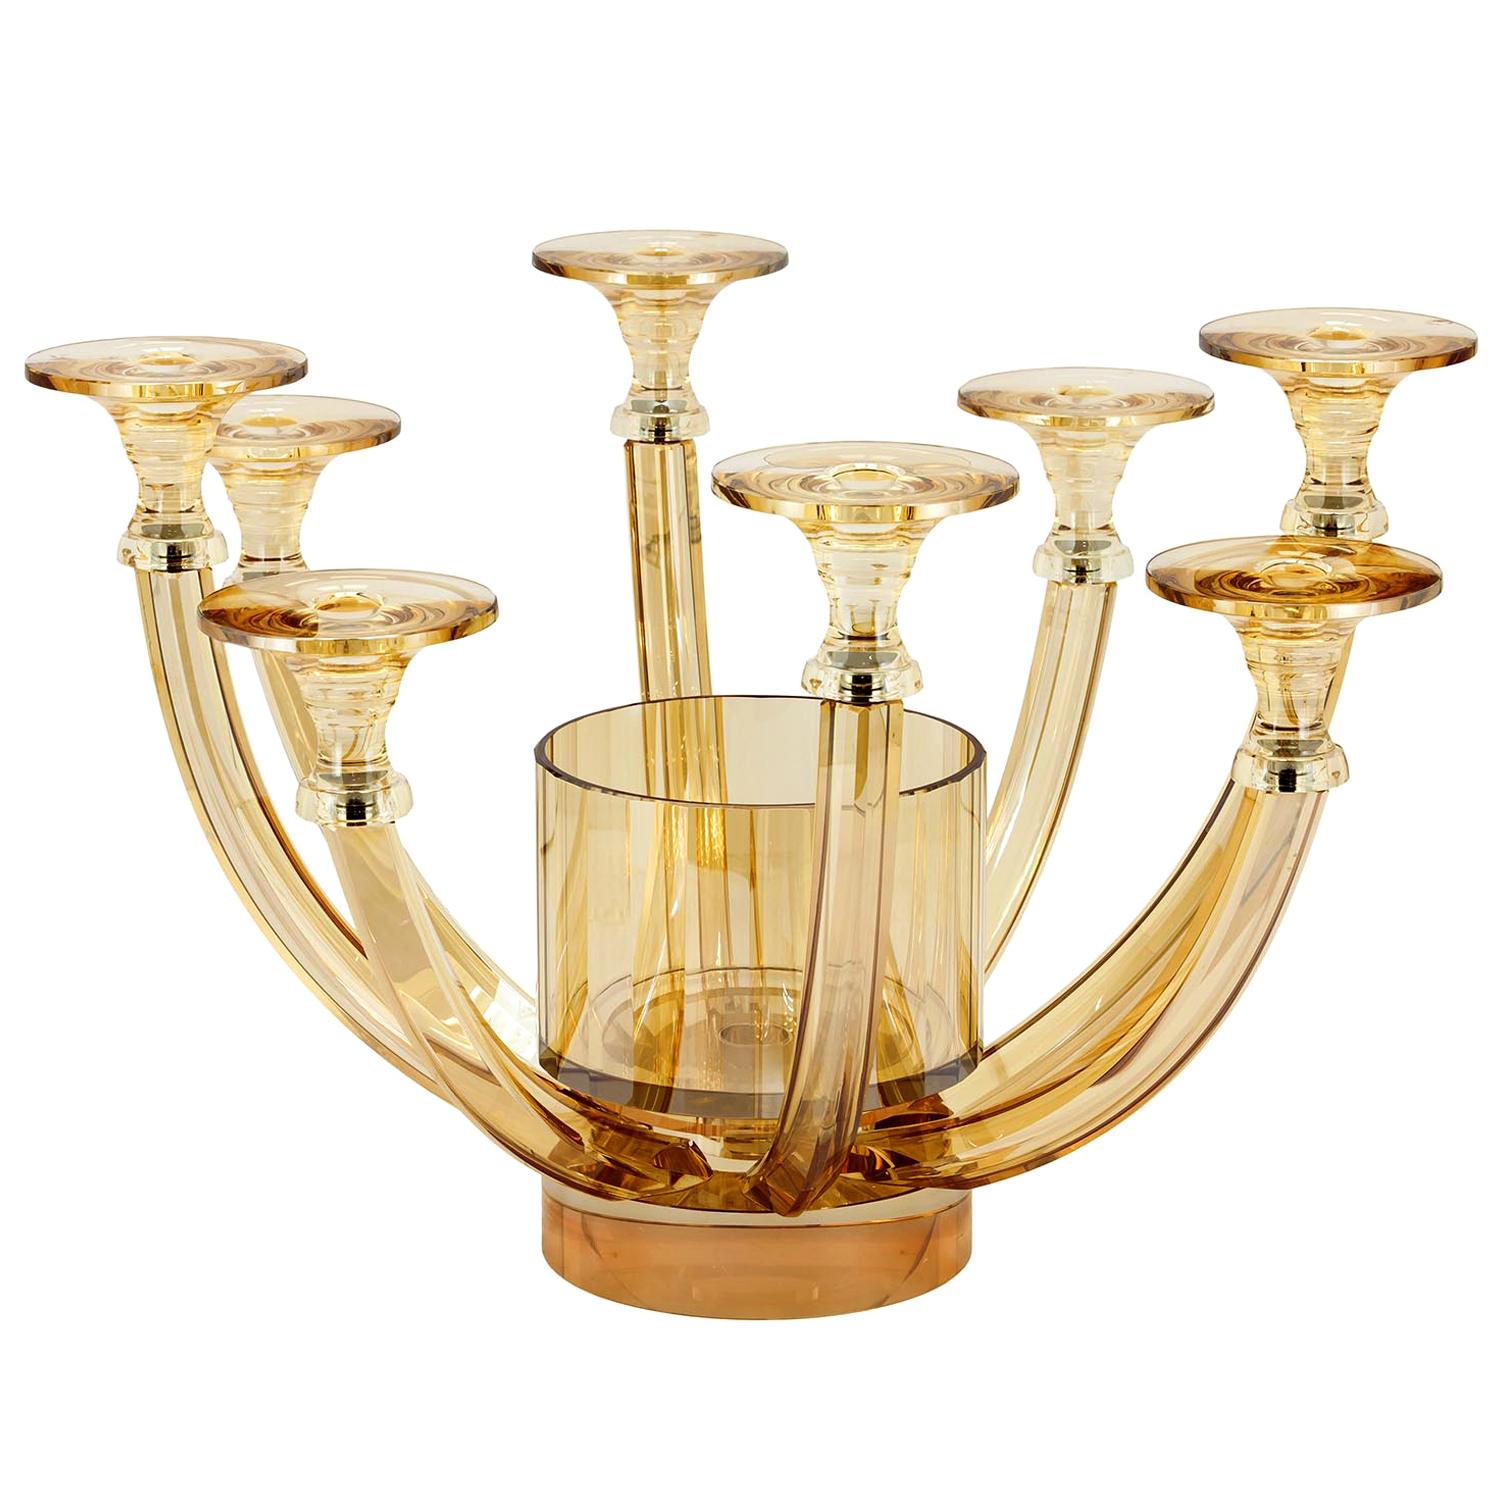 Stylish Crystal Vase-Candlestick in Amber Color